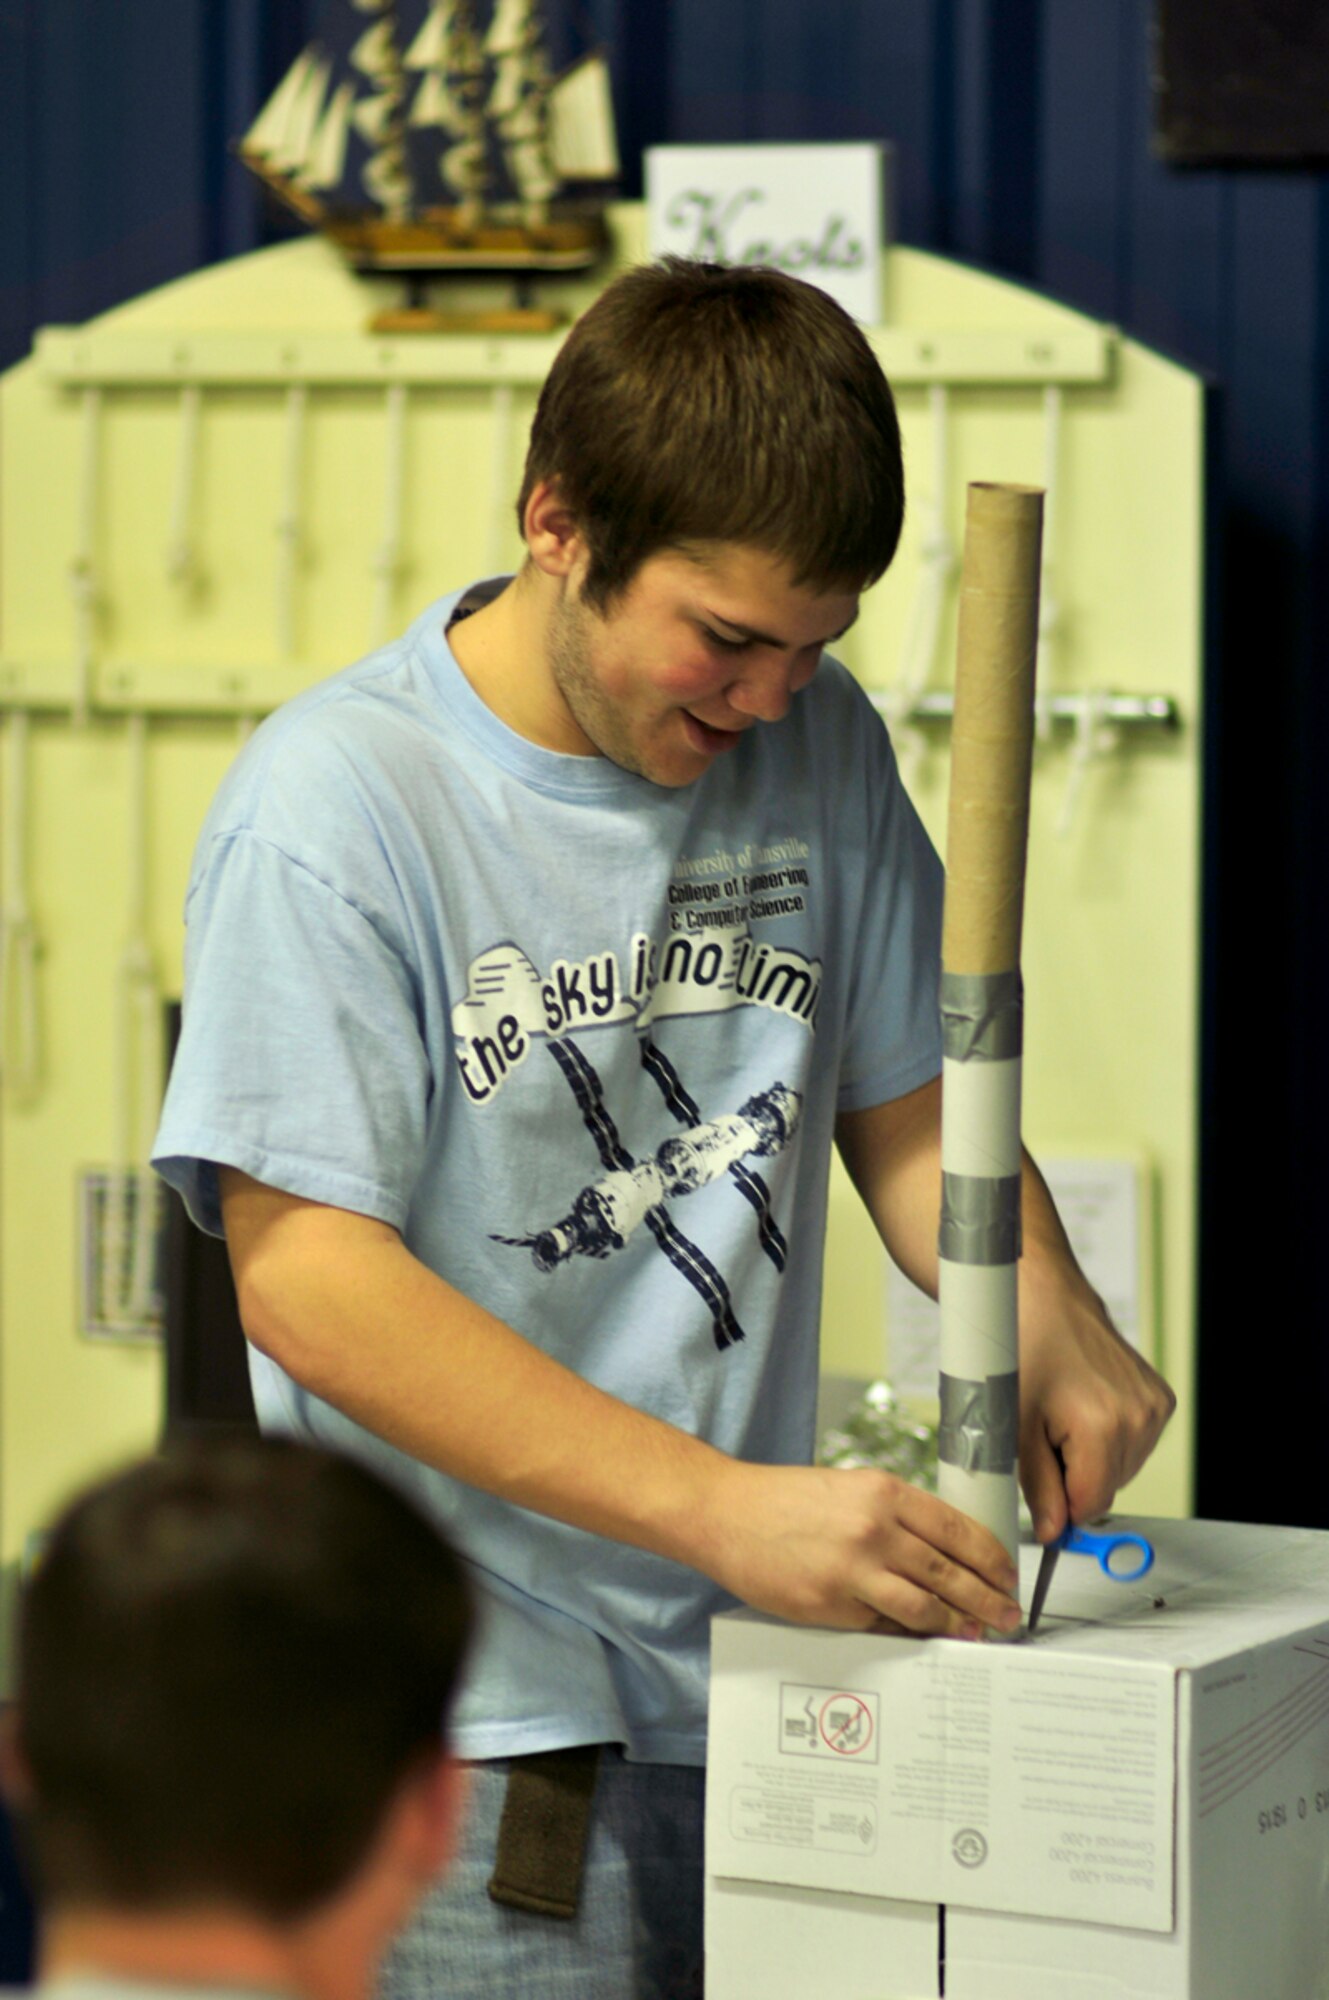 Moore County High School junior Dakota Bateman works on a space elevator designed to carry a payload a minimum distance of half a meter during the Student Design Competition held at the Hands-On Science Center Feb. 21. (Photo by Jacqueline Cowan)